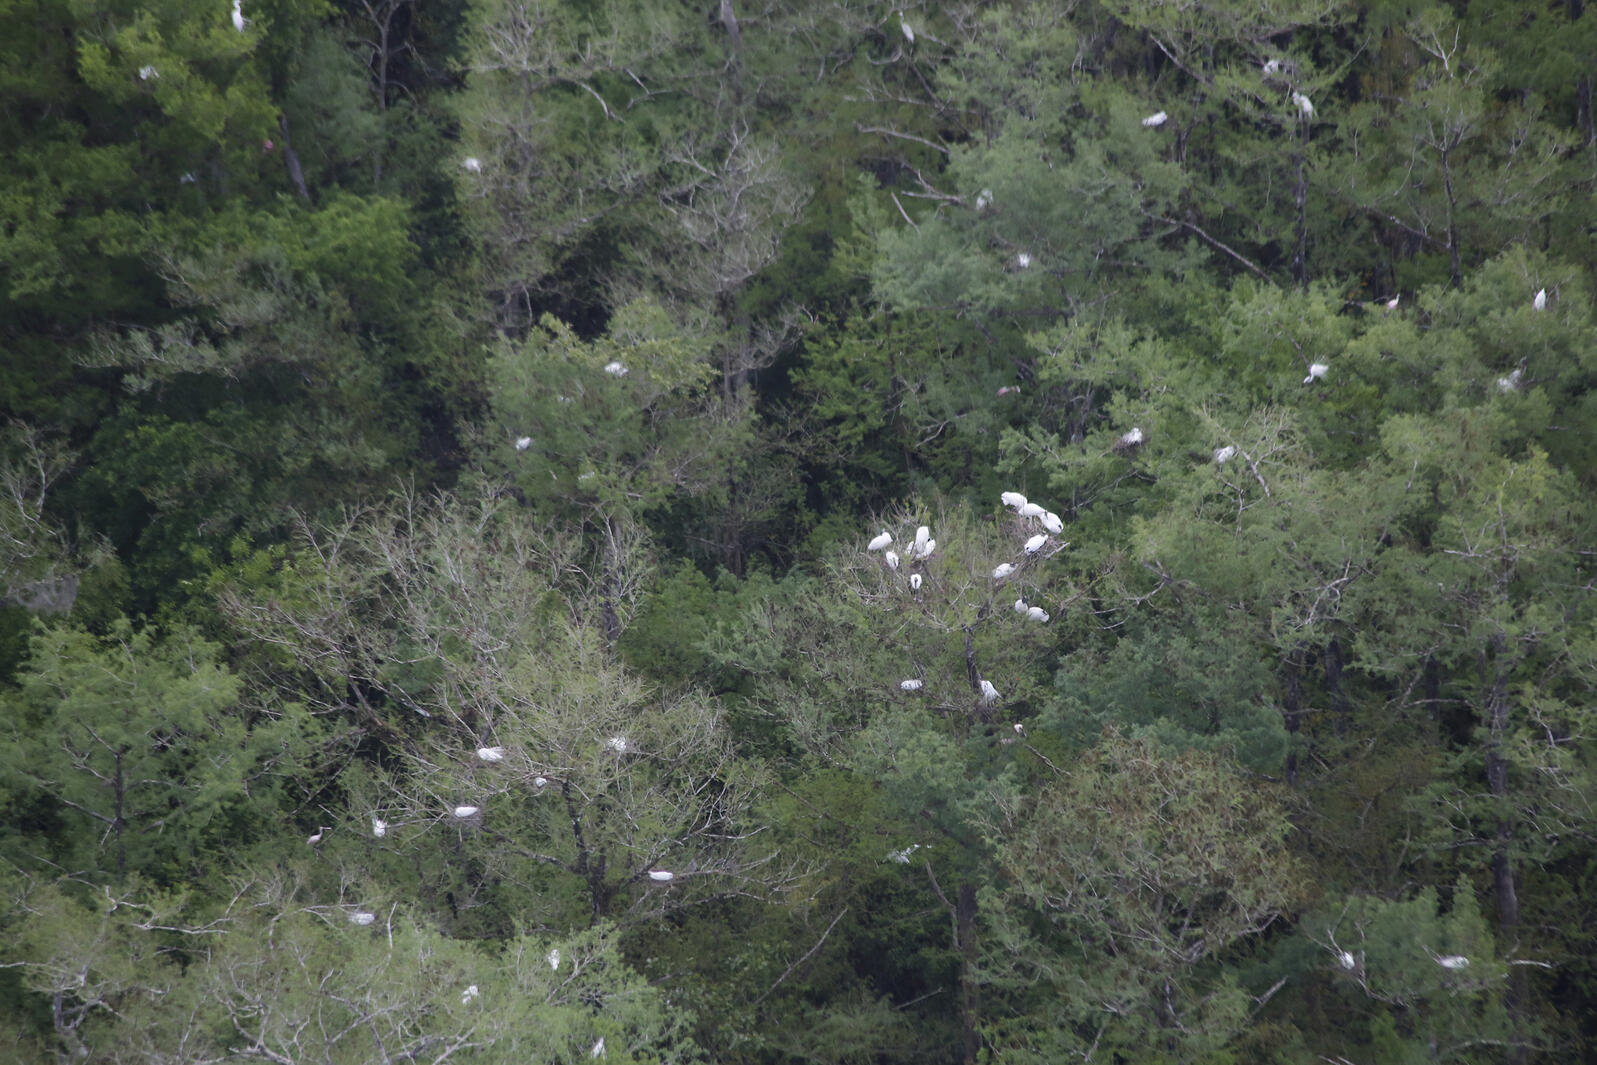 Wood Storks in the treetops